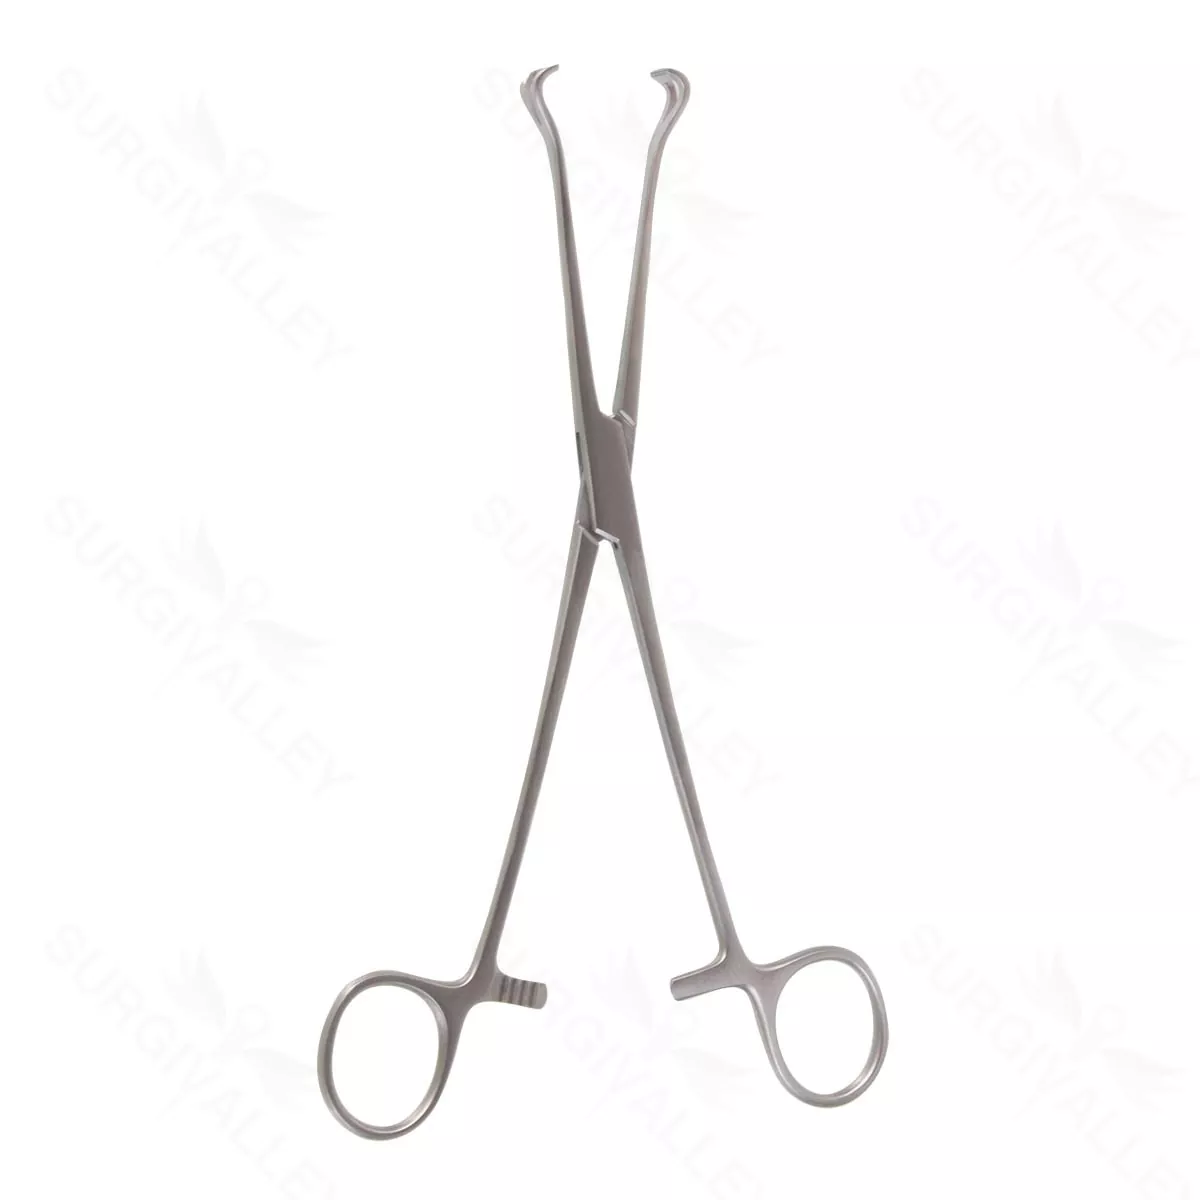 8″ Babcock Tiss Forceps – 1/2″ wide